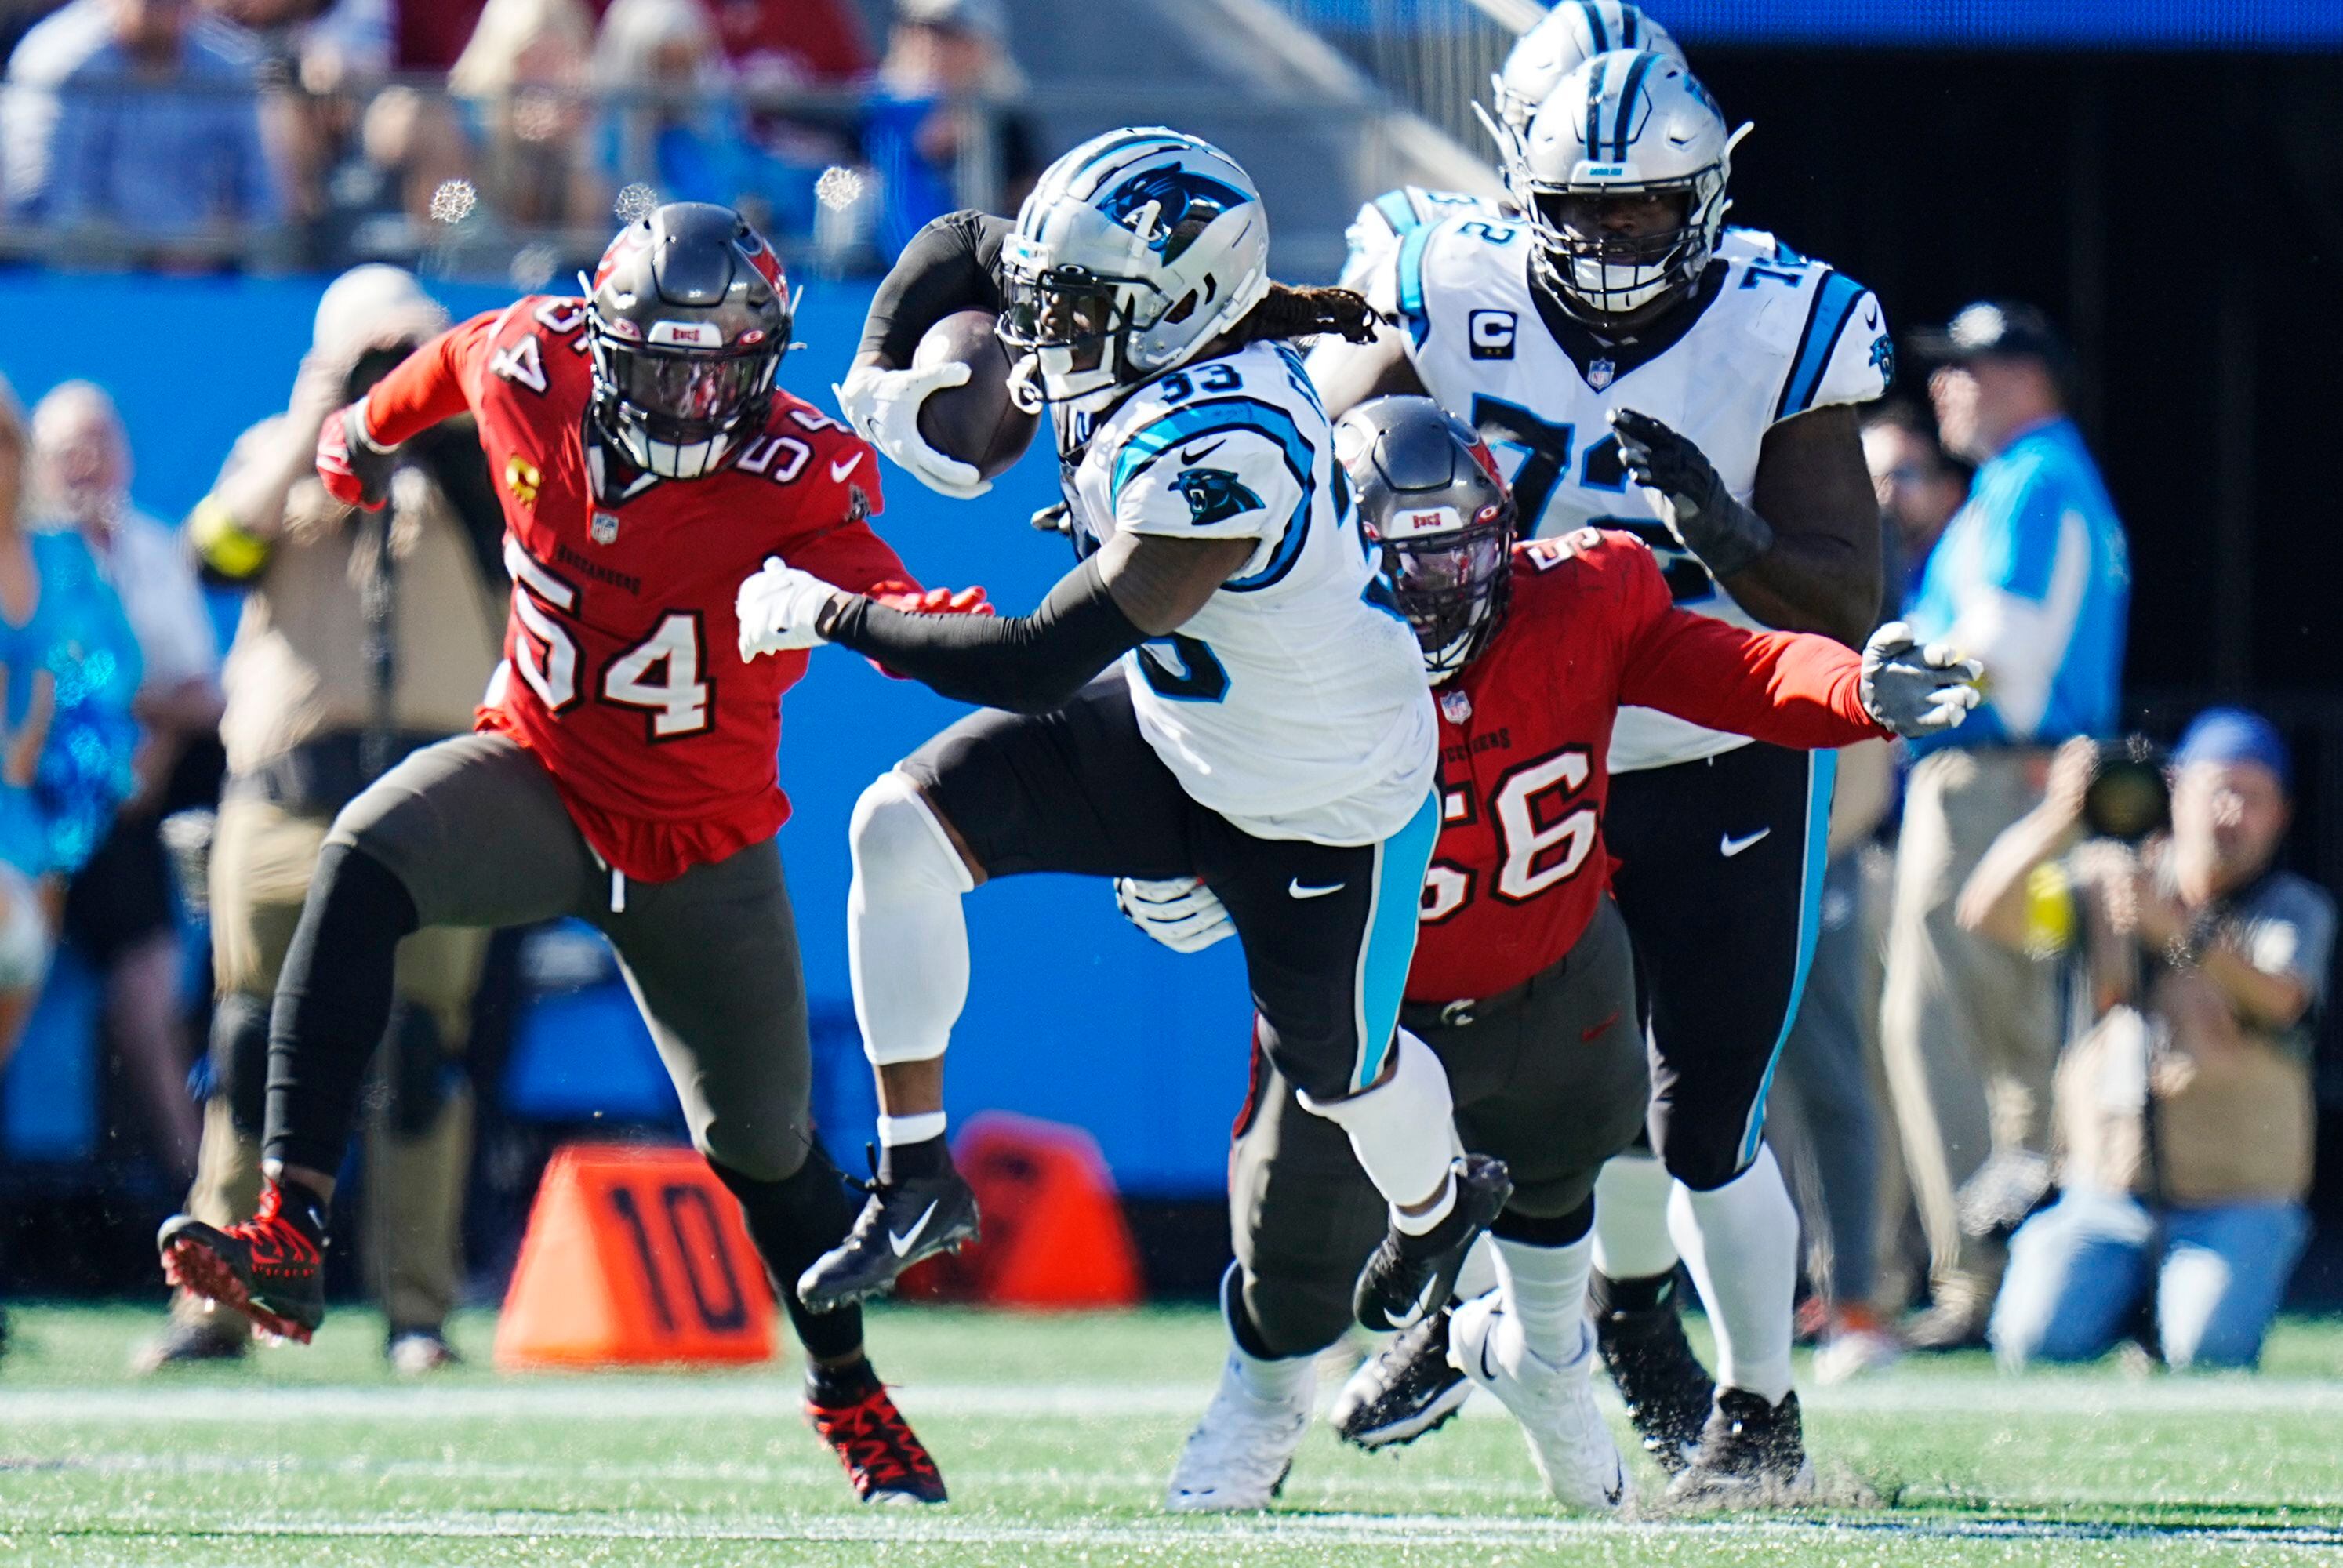 Brady, Bucs drop under .500 with shocking loss to Panthers